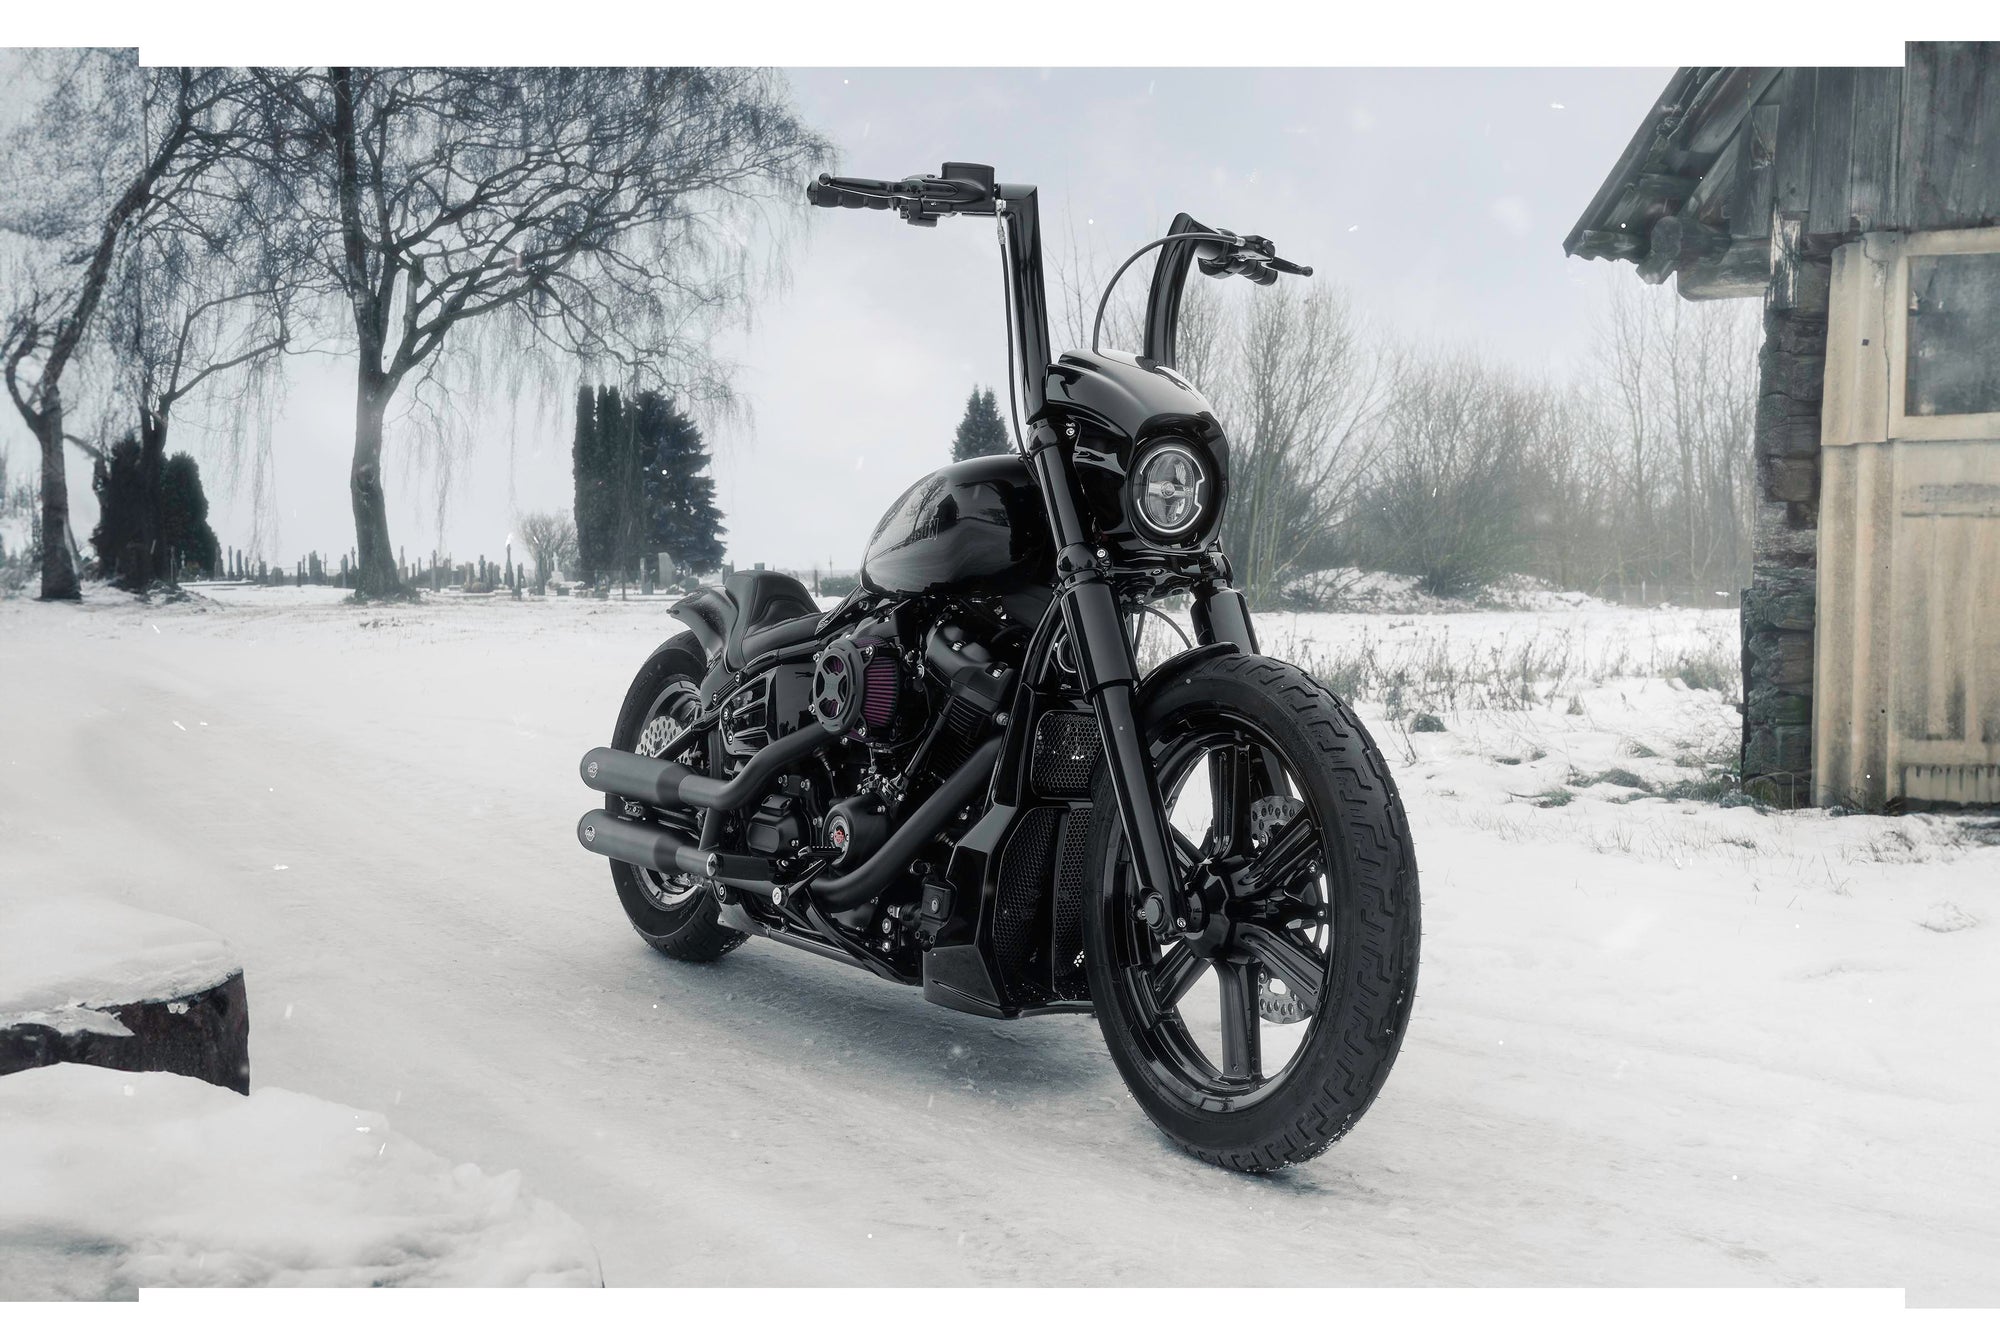 Modified Harley Davidson Softail motorcycle with Killer Custom parts form the front outside on a snowy day with an abandoned shack in the background